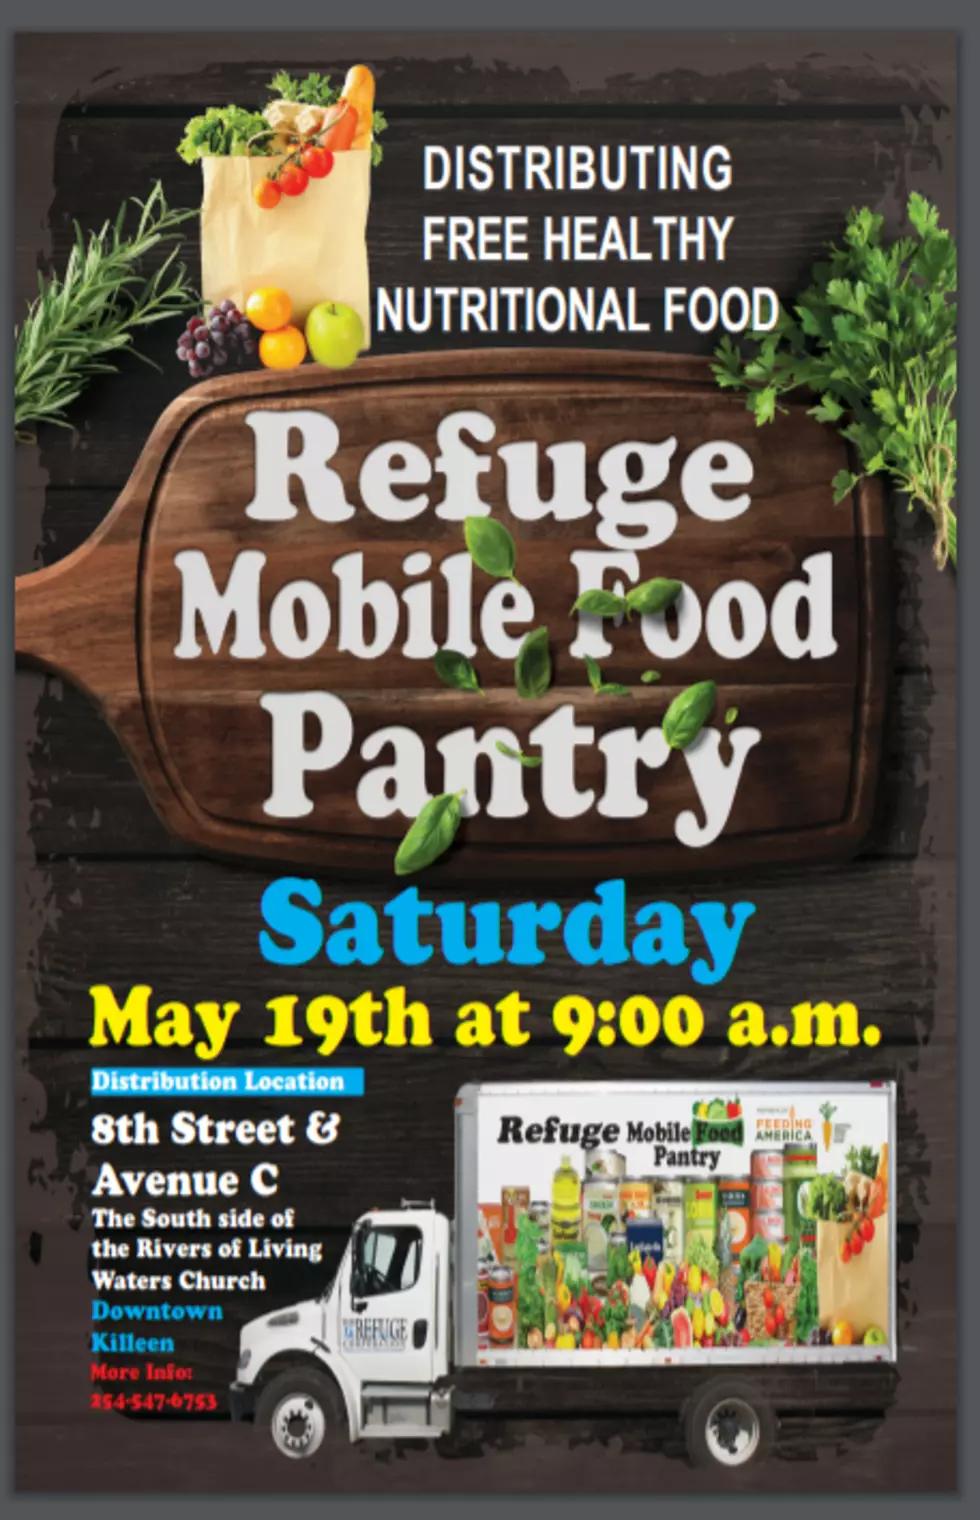 Refuge Mobile Food Pantry Distribution This Saturday In Killeen